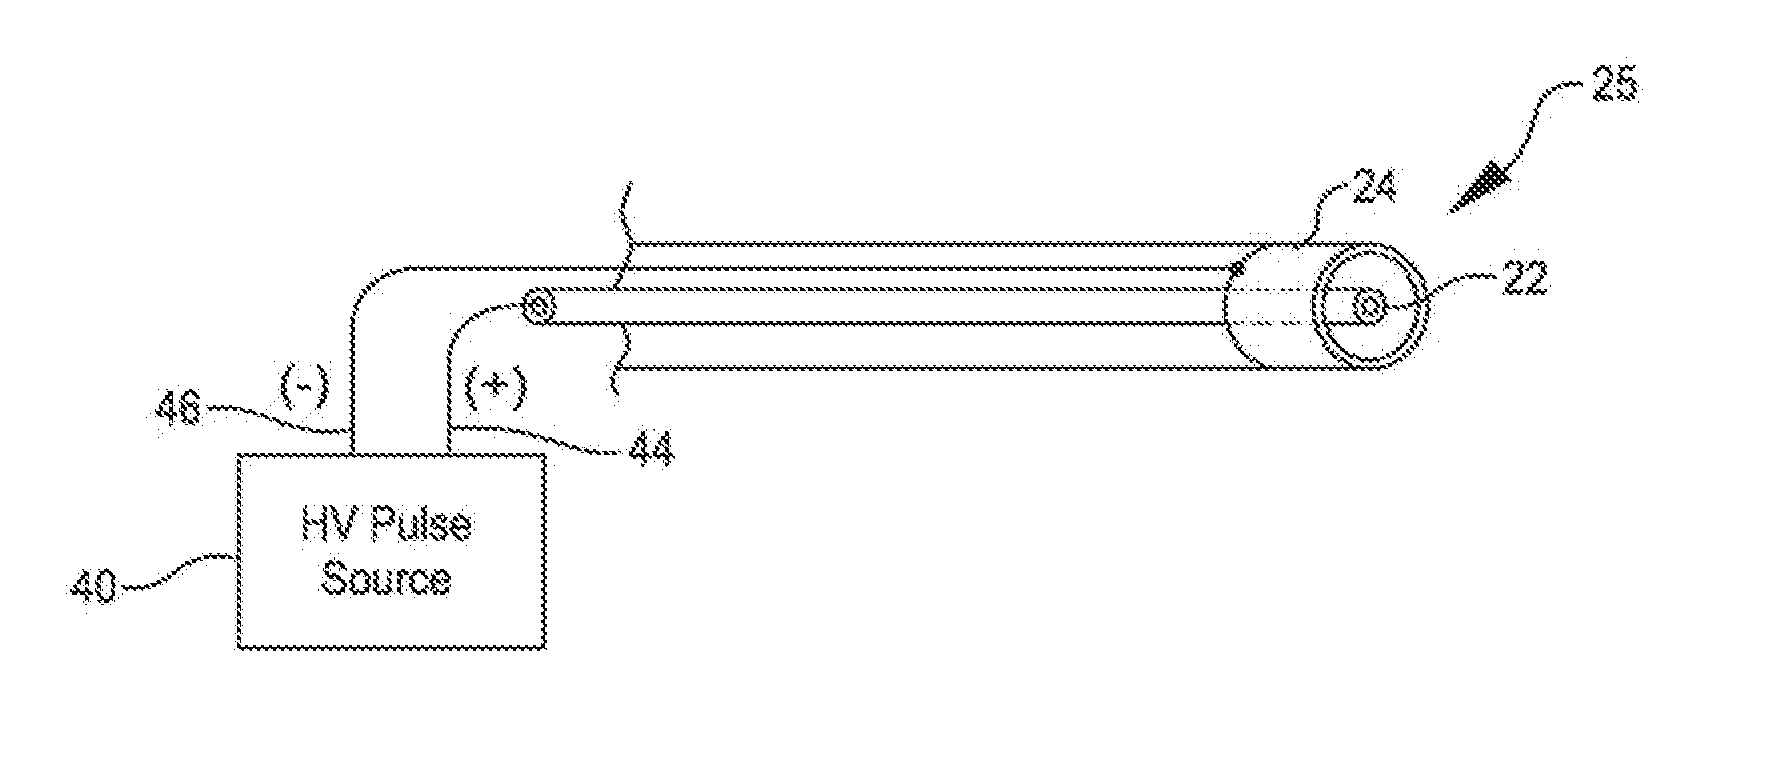 Shockwave catheter system with energy control